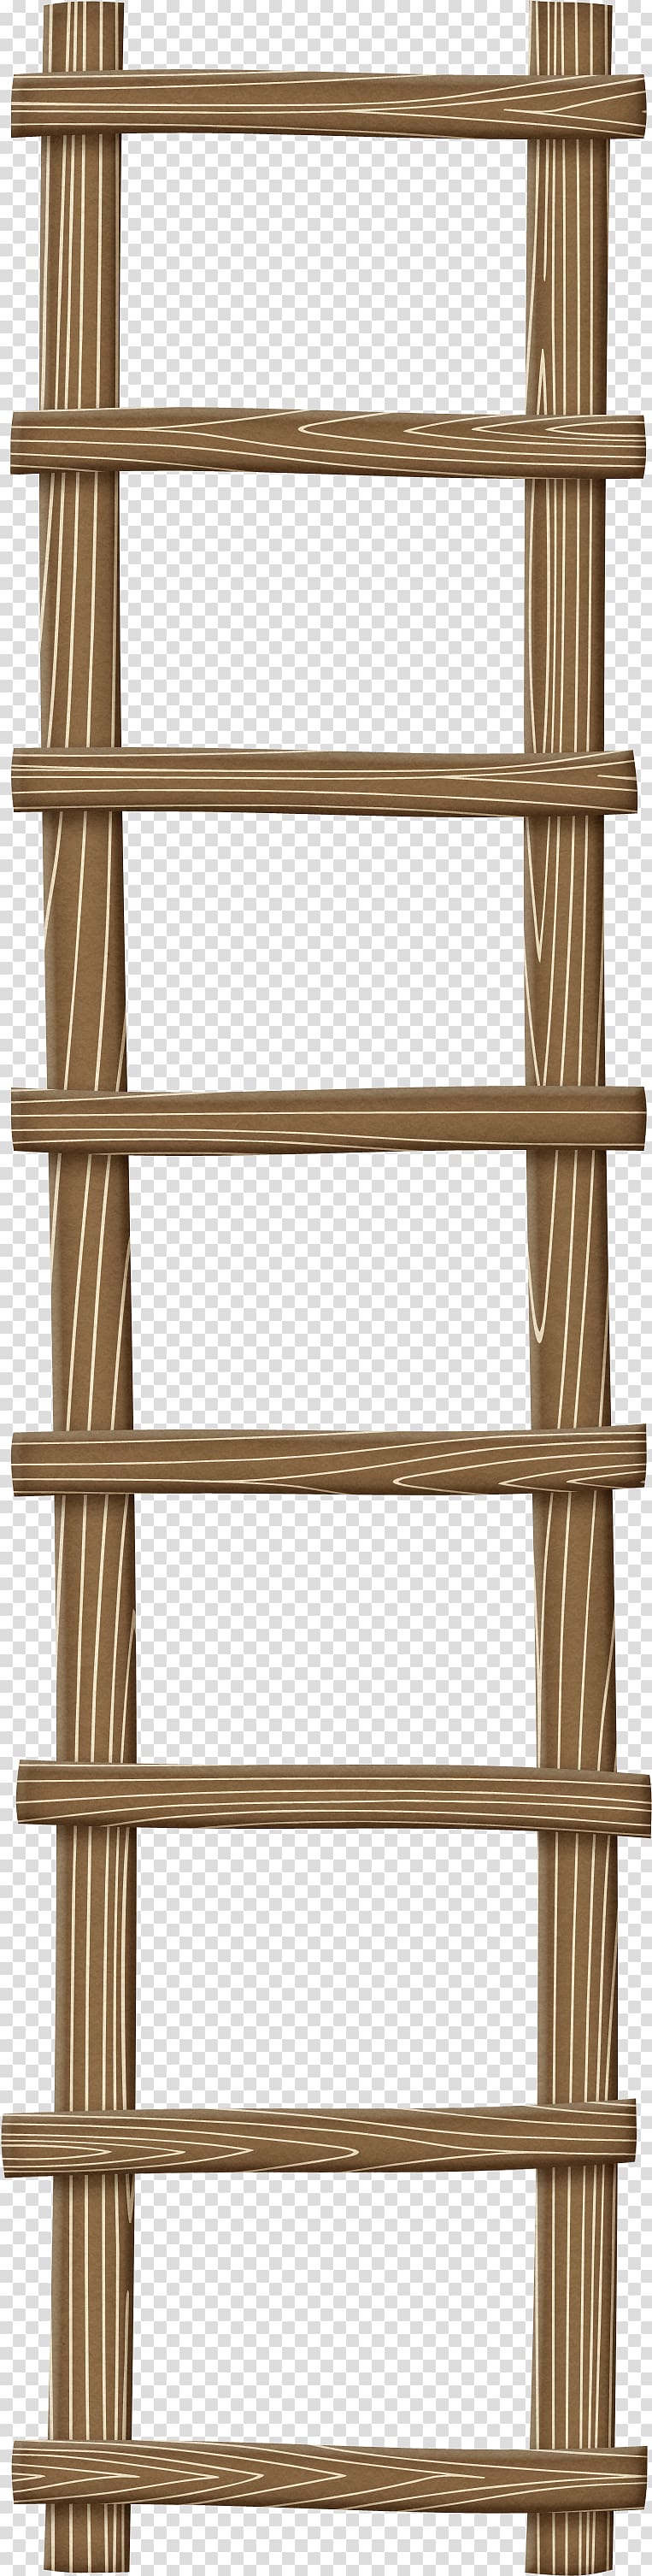 Stairs Ladder Stair riser Icon, Wood ladder transparent background PNG clipart